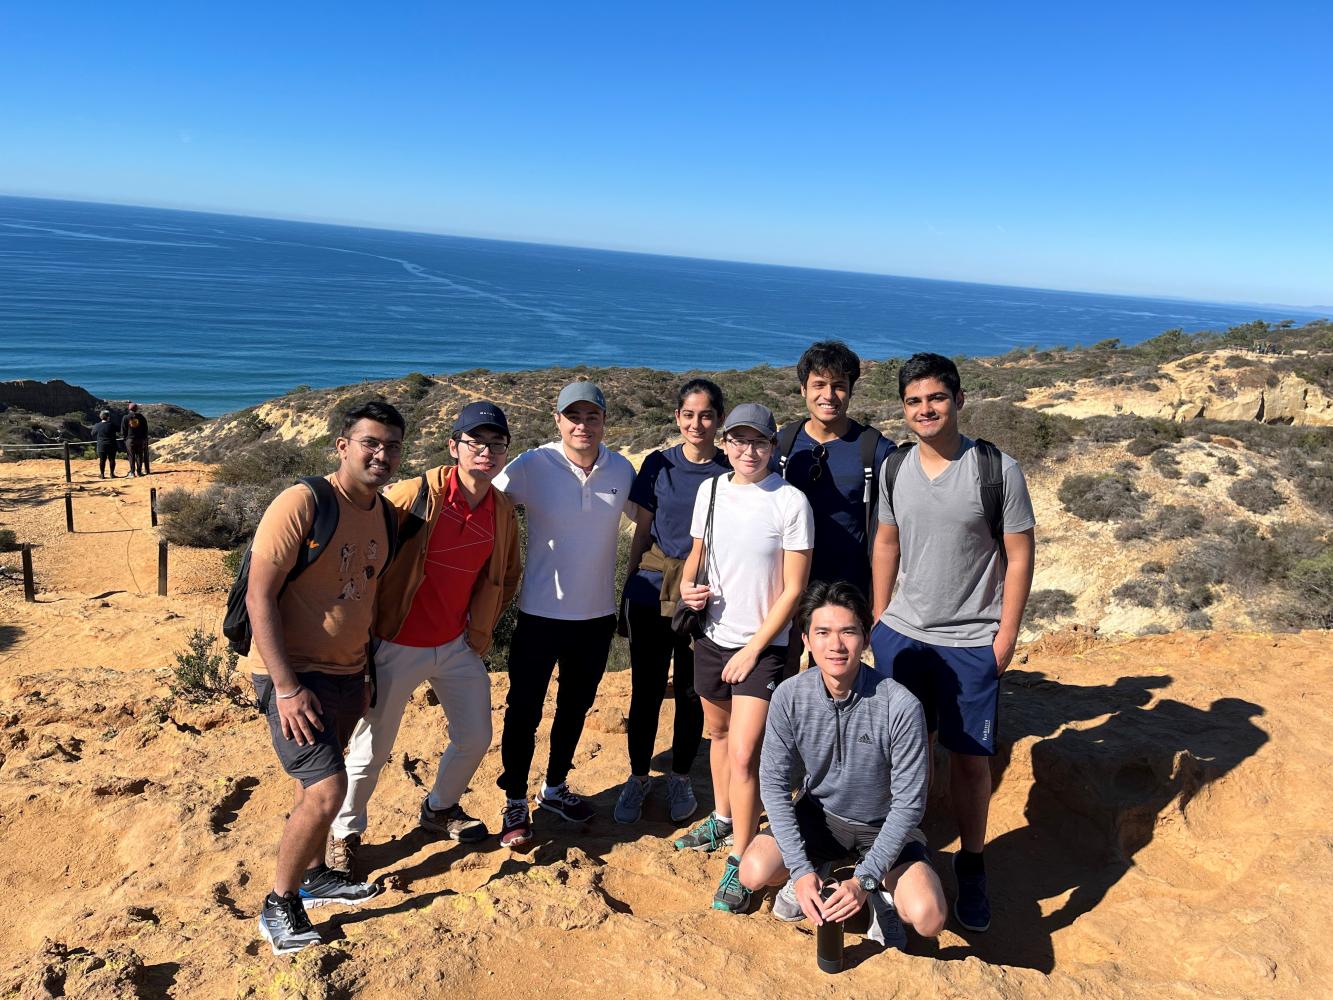 Picture of eight RoboGrads members at the Torrey Pines trail with the ocean in the background